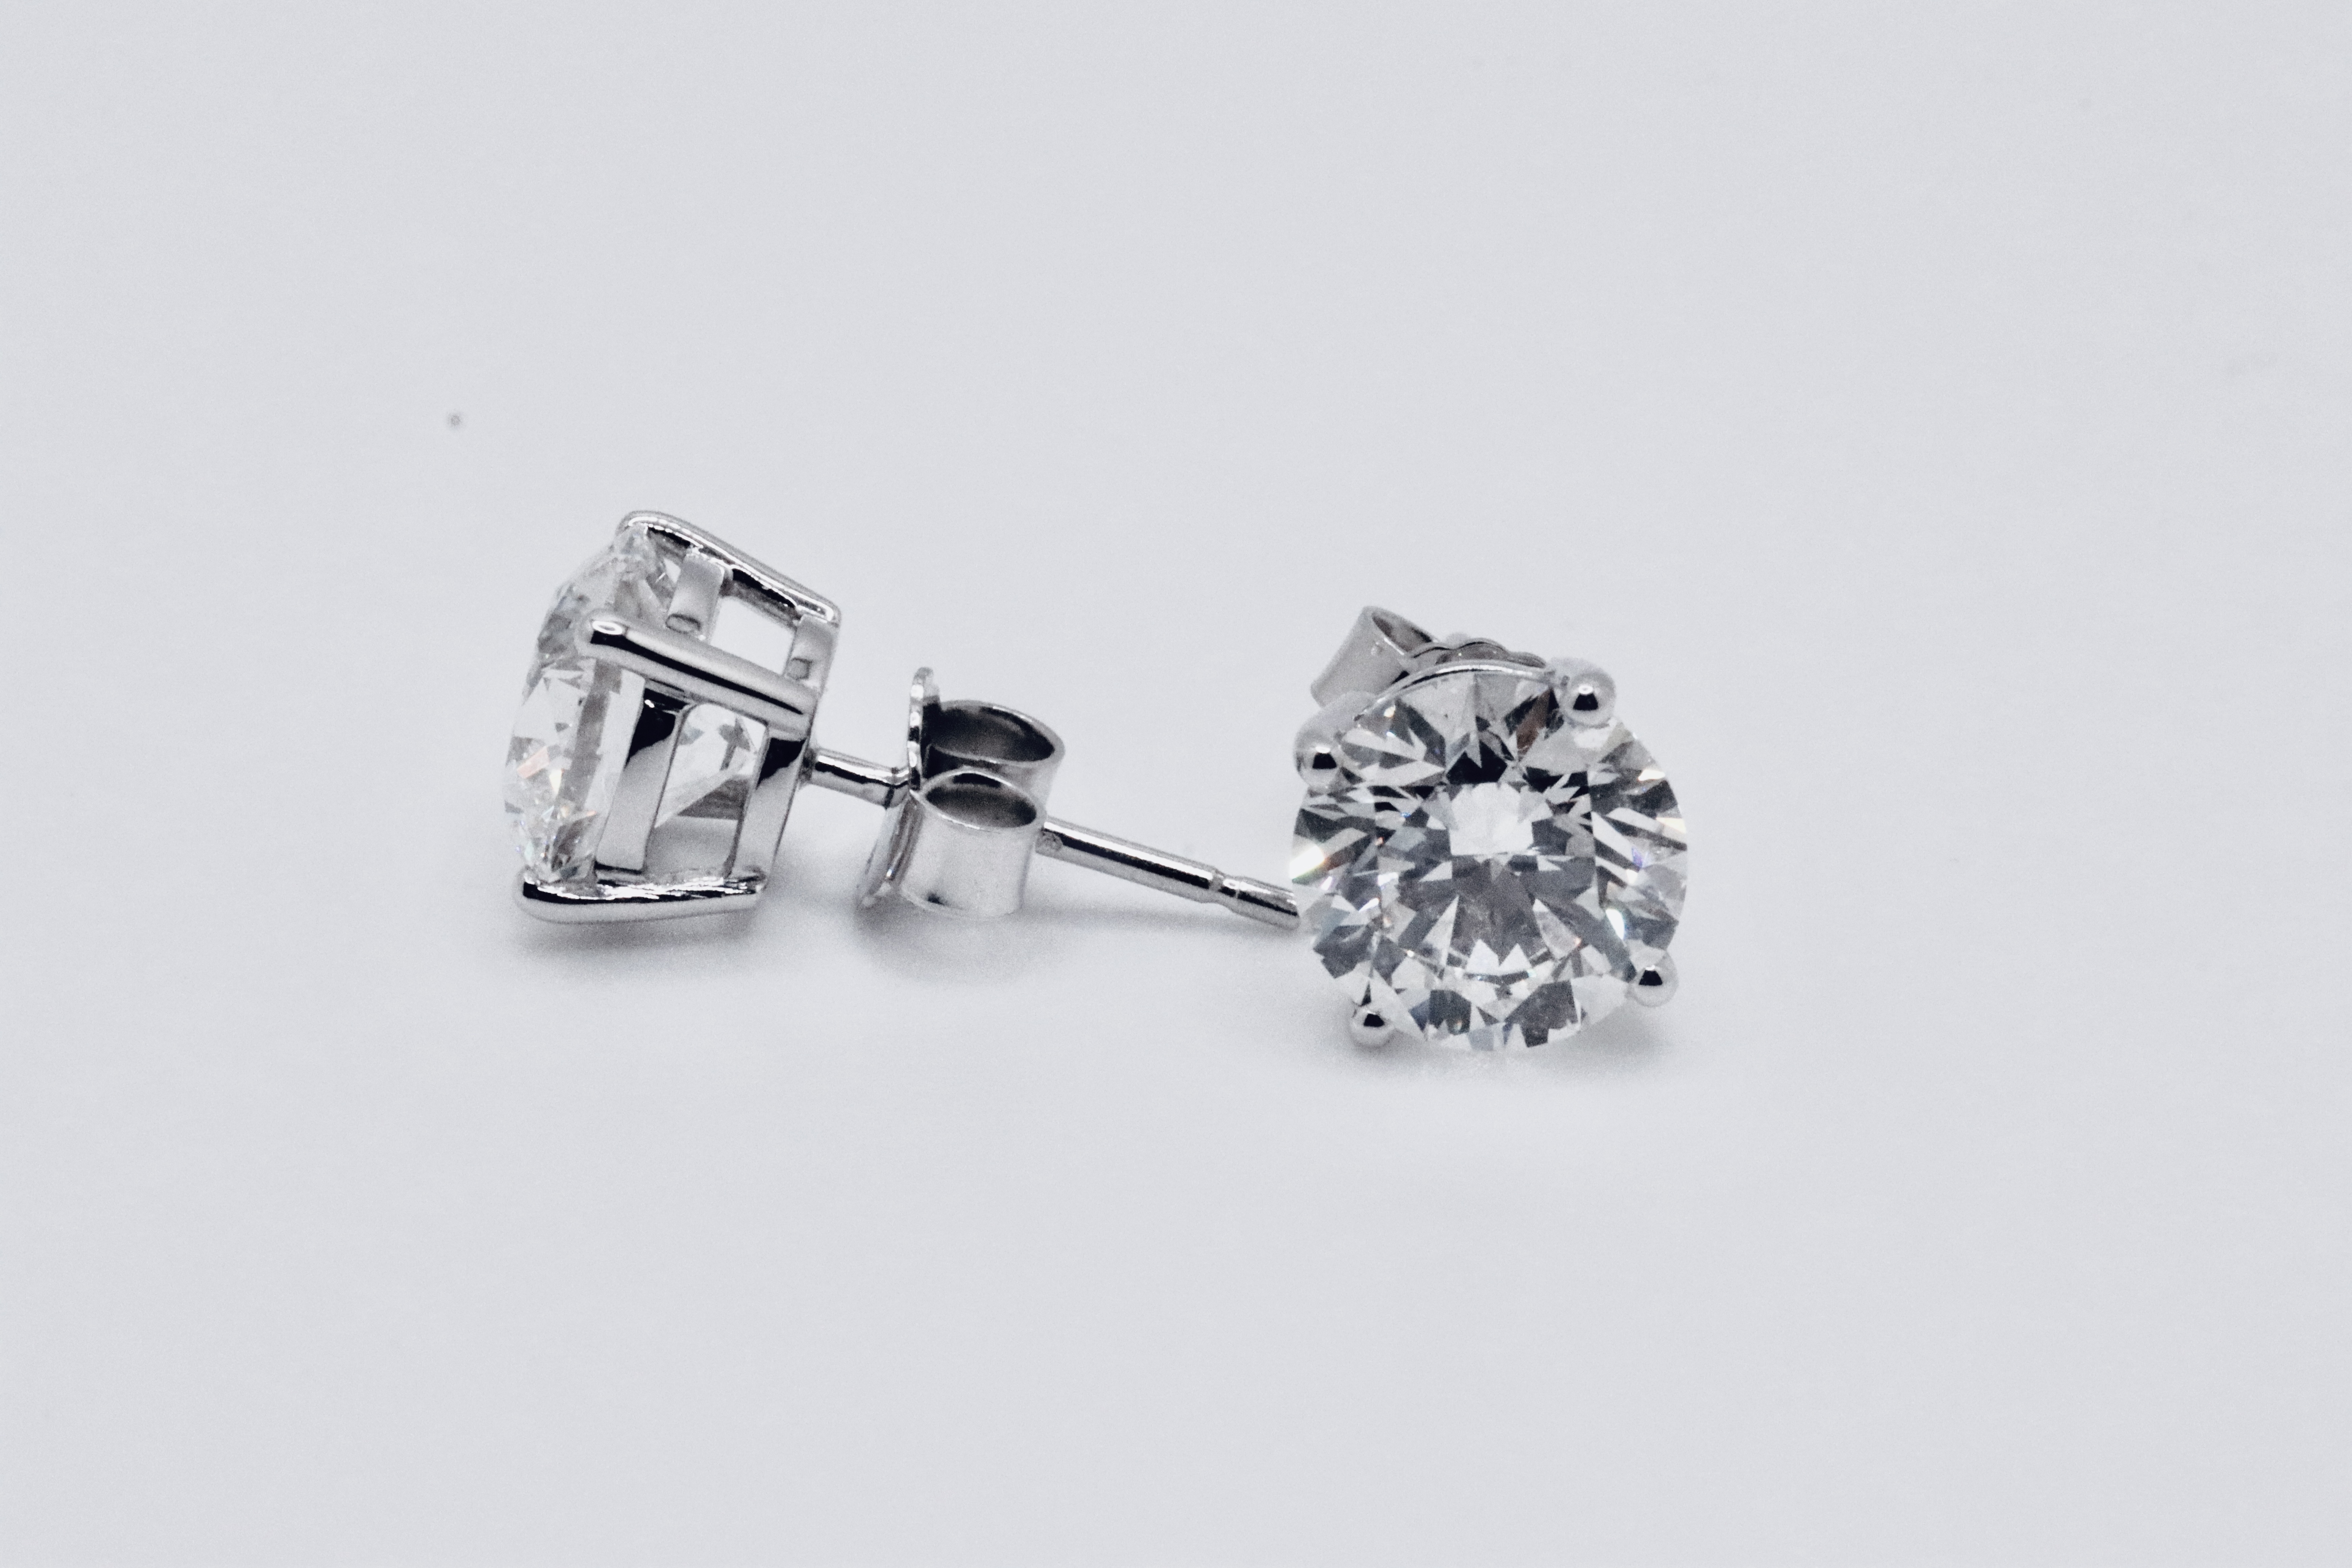 Round Brilliant Cut 2.00 Carat Diamond Earrings Set in 18kt Gold - F Colour VVS - GIA - Image 3 of 4